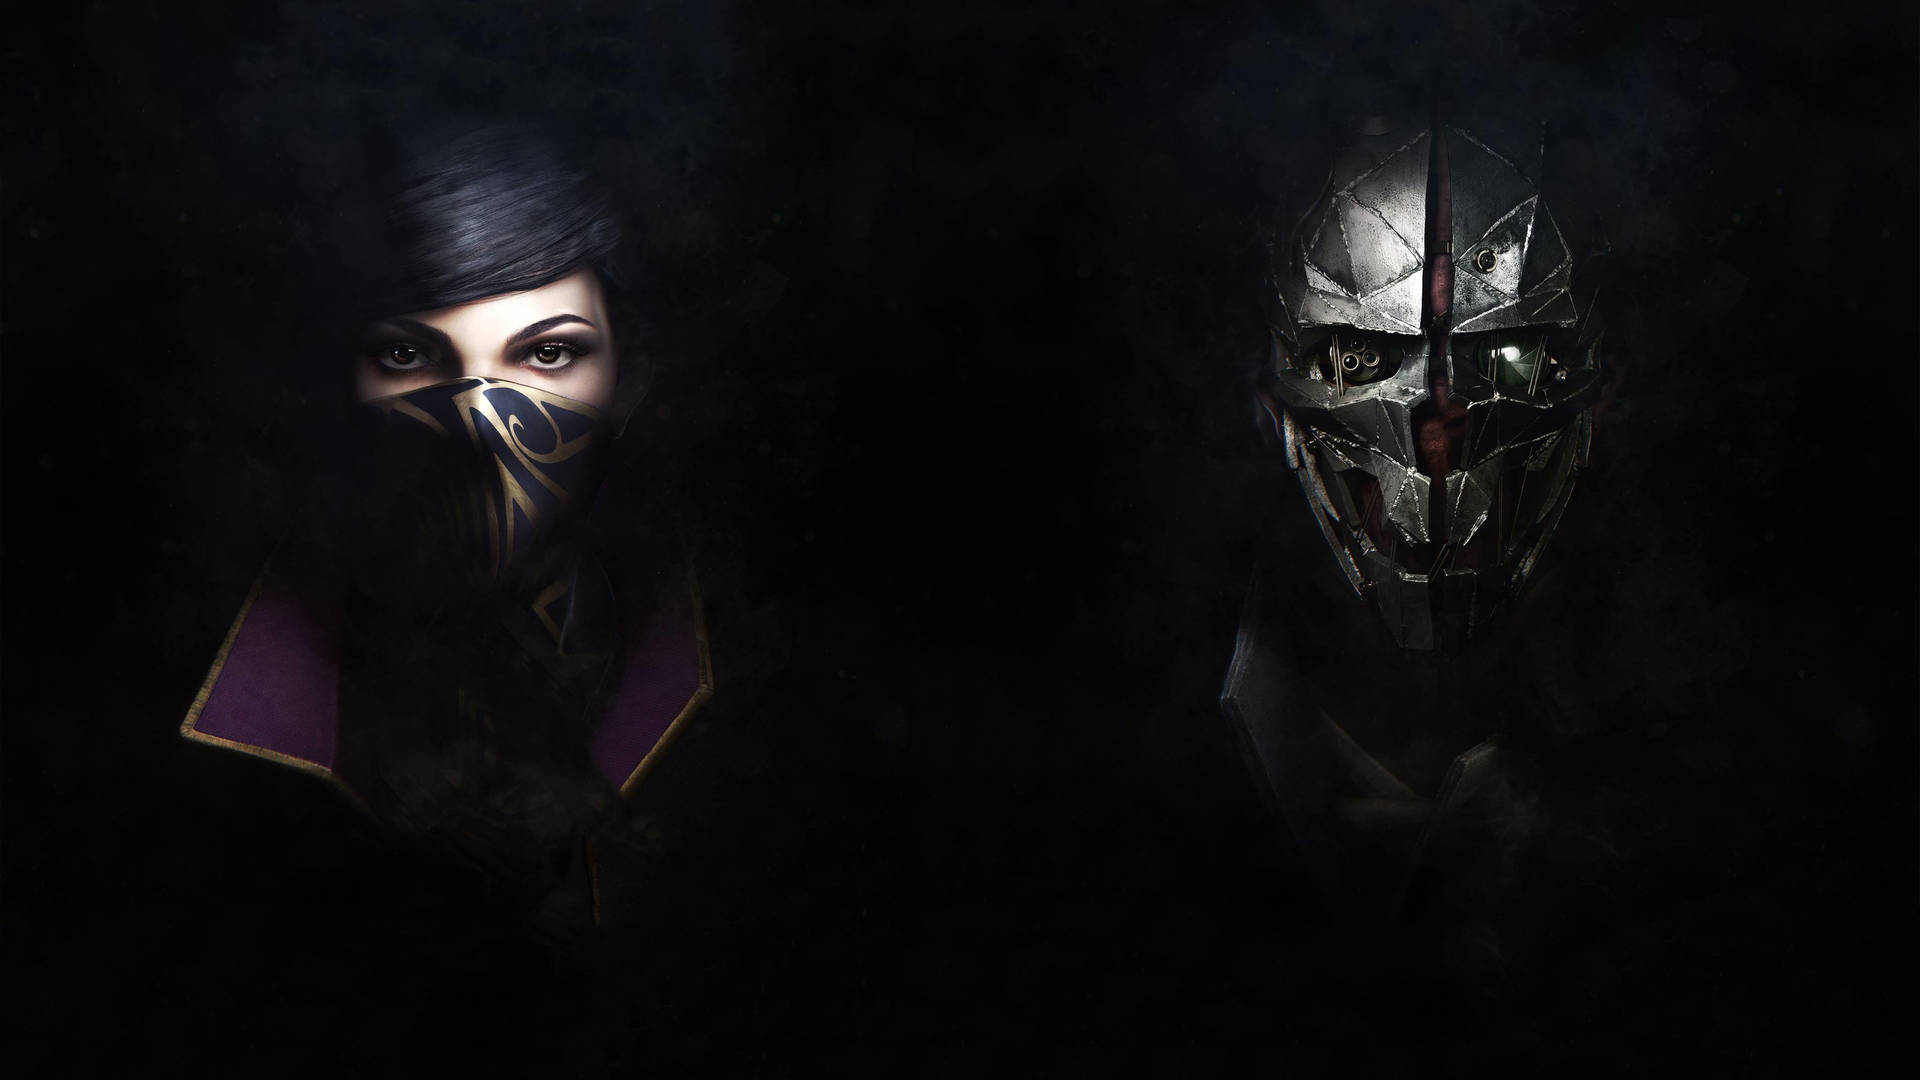 Dishonored 2 Emily And Corvo In The Dark Wallpaper